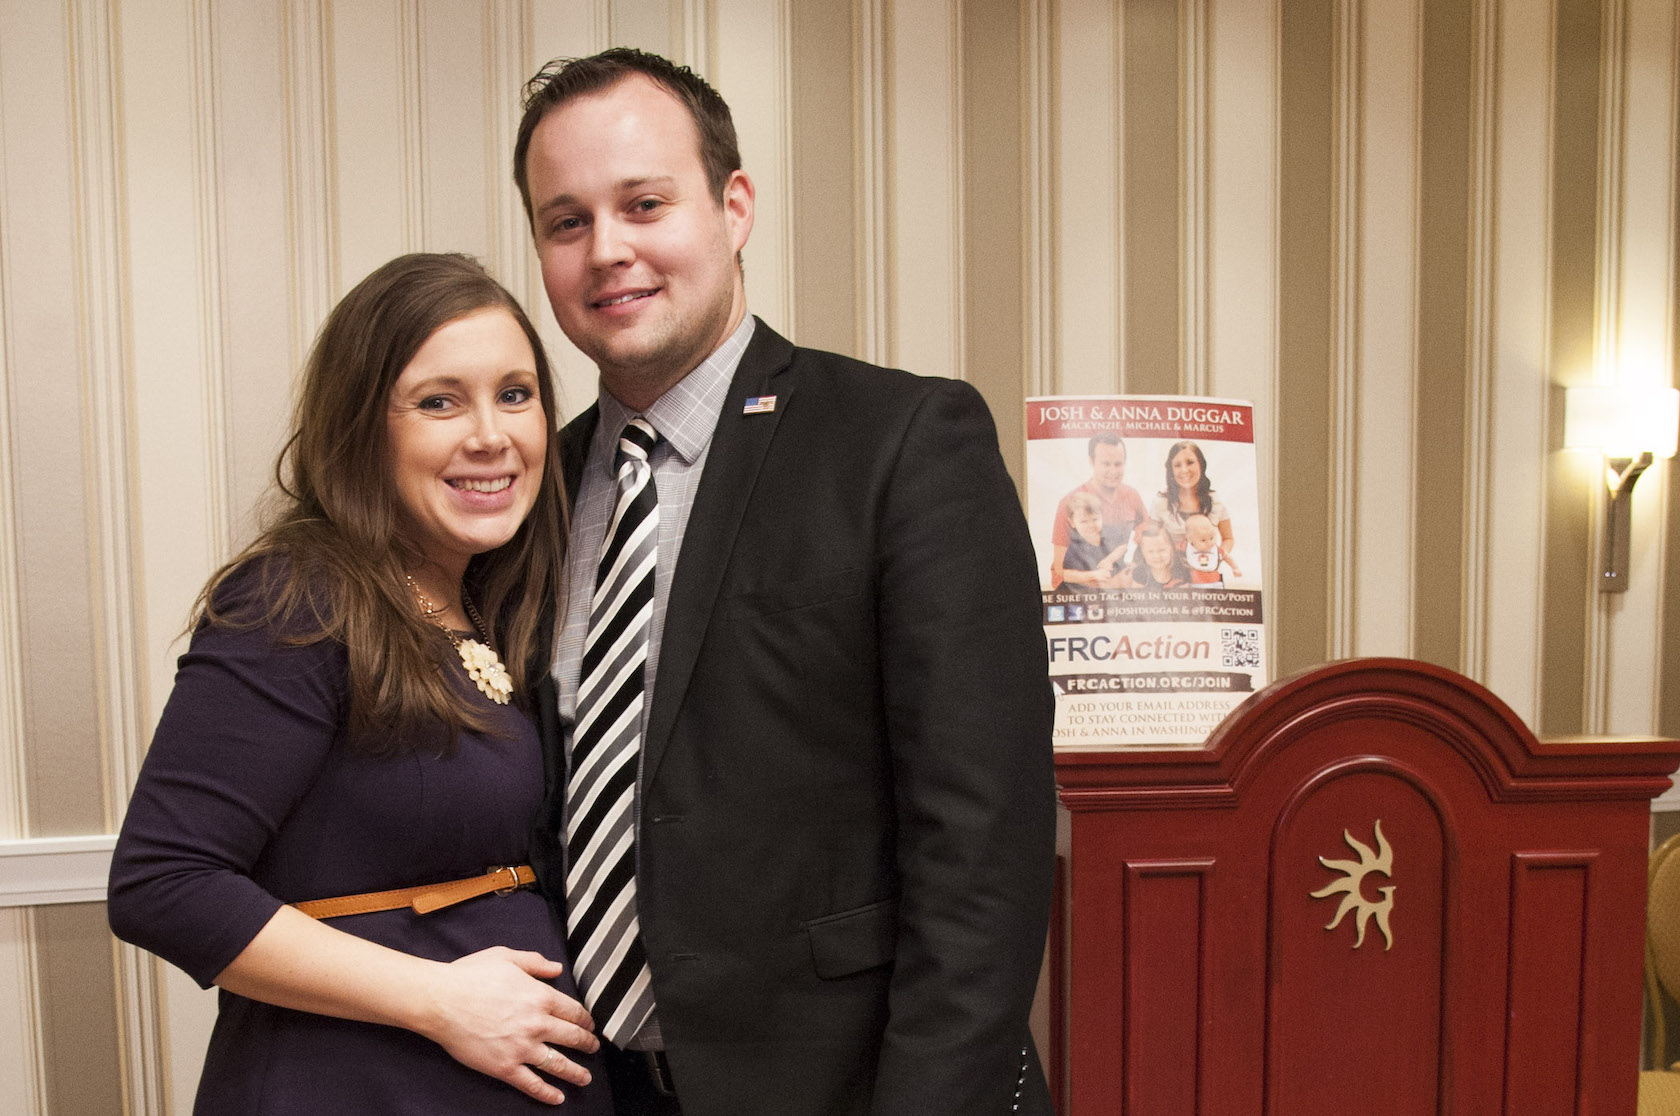 Anna Duggar hugging Josh Duggar, two members of the Duggar family from TLC's 'Counting On,' at the 42 annual Conservative Political Action Conference